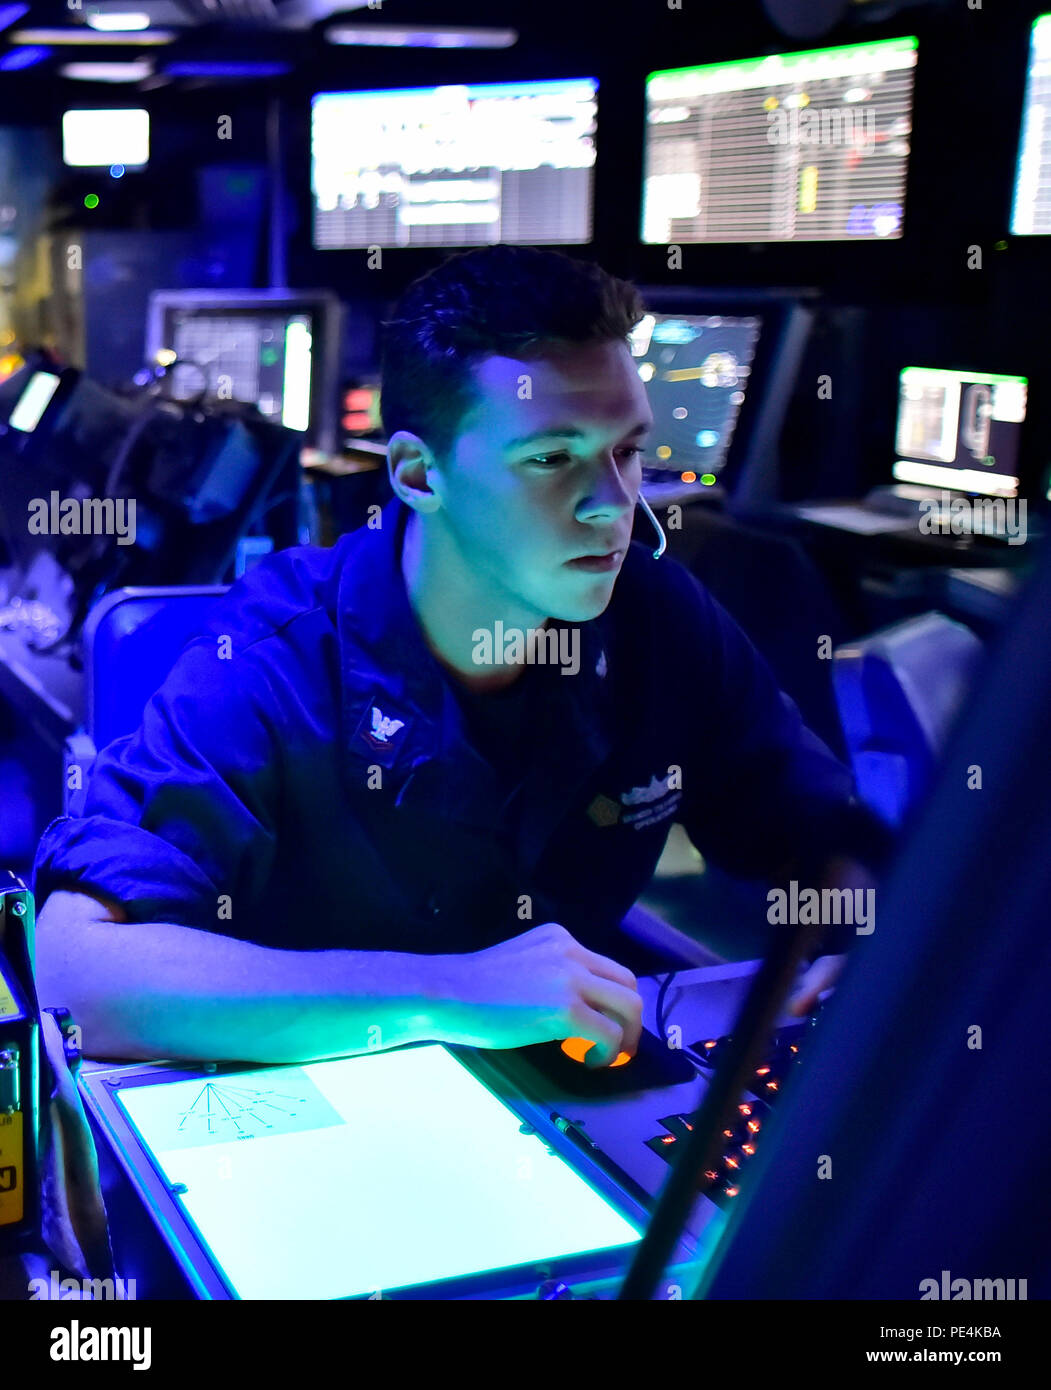 150917-N-ZZZ99-007  ATLANTIC OCEAN (Sept. 17, 2015) - Air Traffic Controller 2nd Class Branden Culp-Henise monitors a radar in the Carrier Air Traffic Control Center of the aircraft carrier USS Dwight D. Eisenhower (CVN 69). Dwight D. Eisenhower is underway conducting carrier qualifications. (U.S. Navy photo by Mass Communication Specialist Seaman Apprentice Liam N. Antinori/Released) Stock Photo